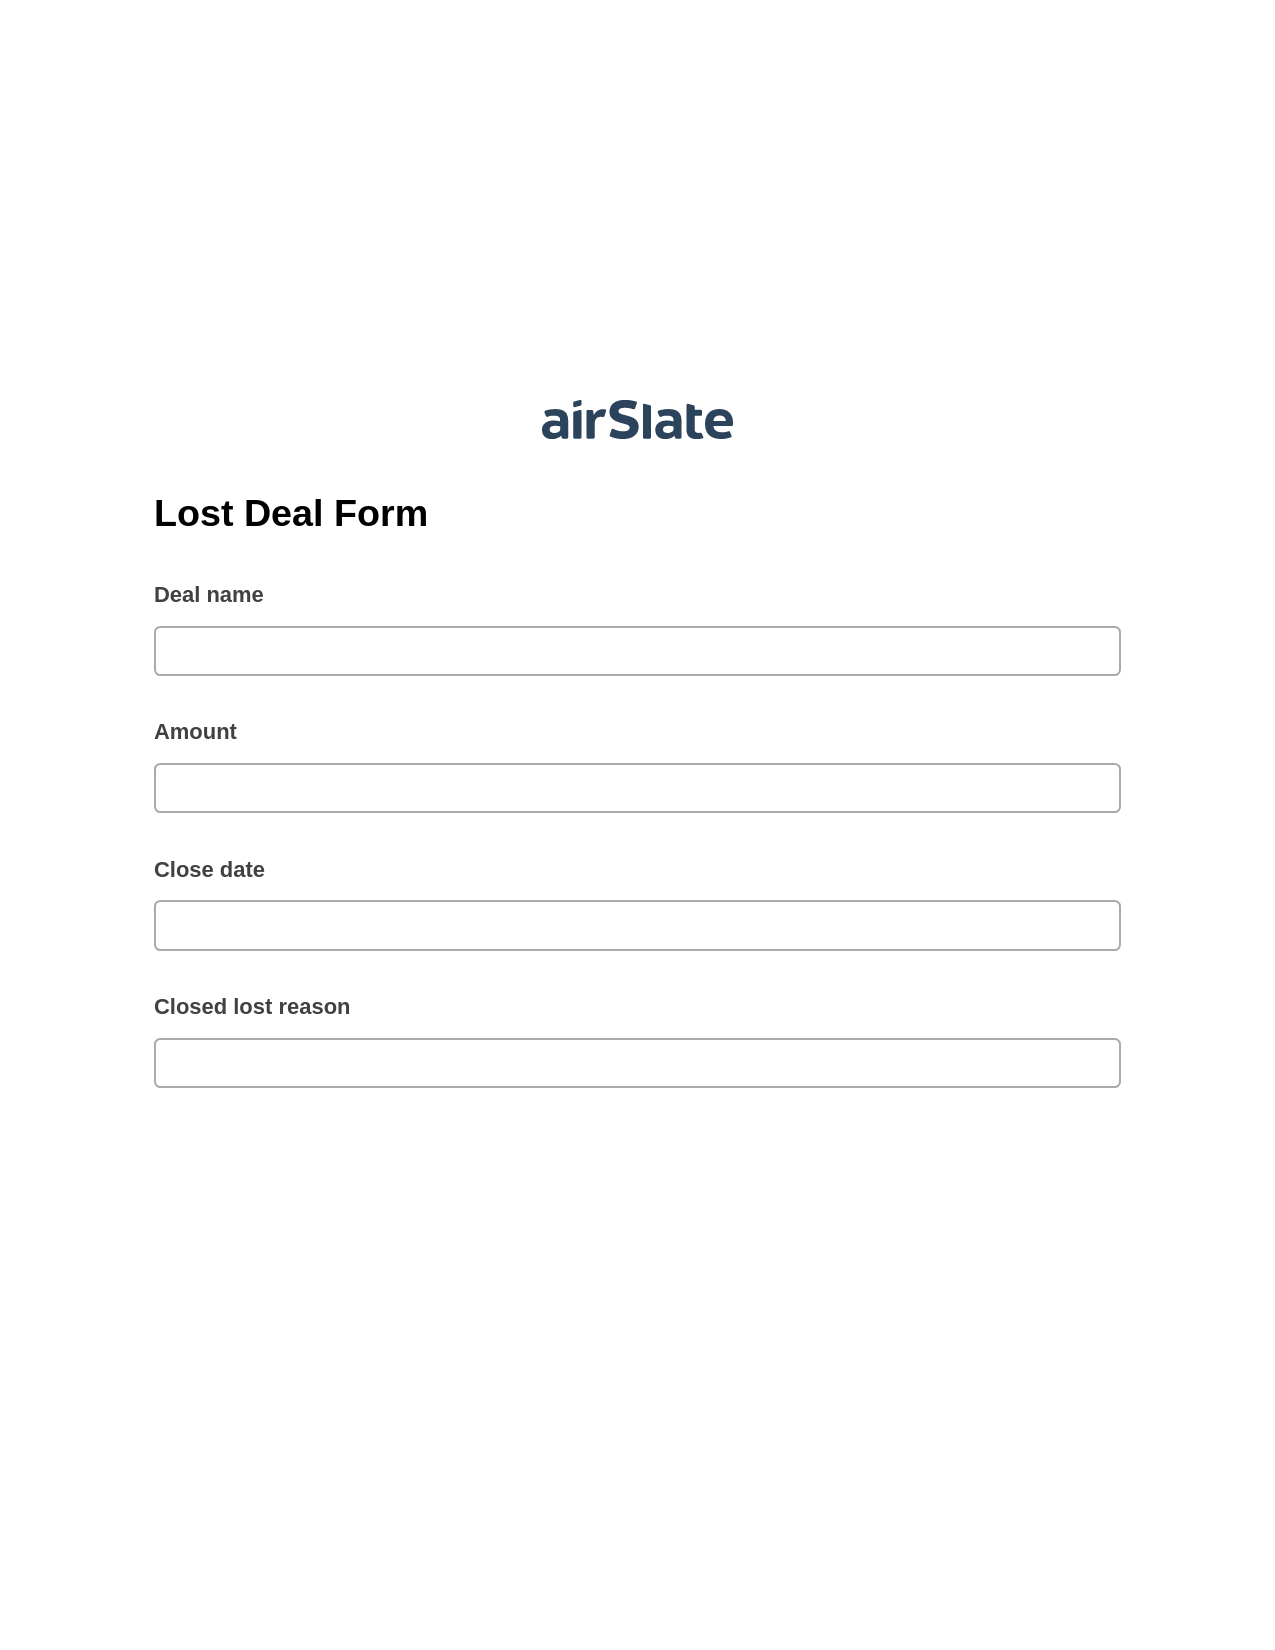 Multirole Lost Deal Form Pre-fill from CSV File Bot, Webhook Bot, Post-finish Document Bot